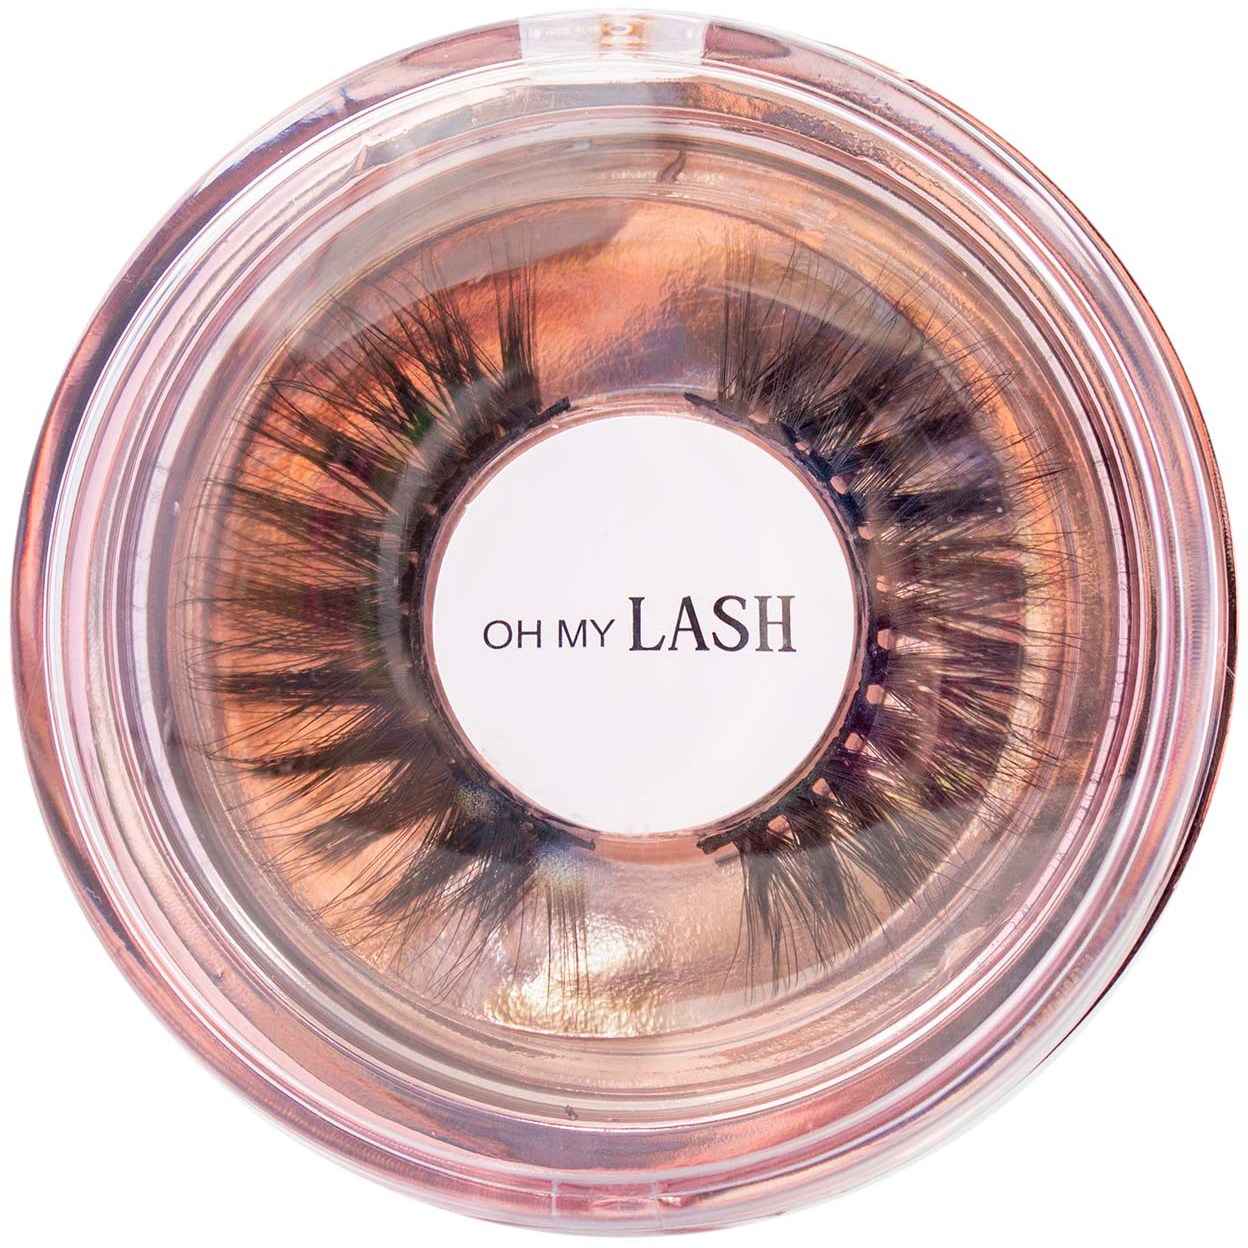 Oh My Lash Faux Mink Strip Lashes You Glow Girl (Plastic Re-Useab